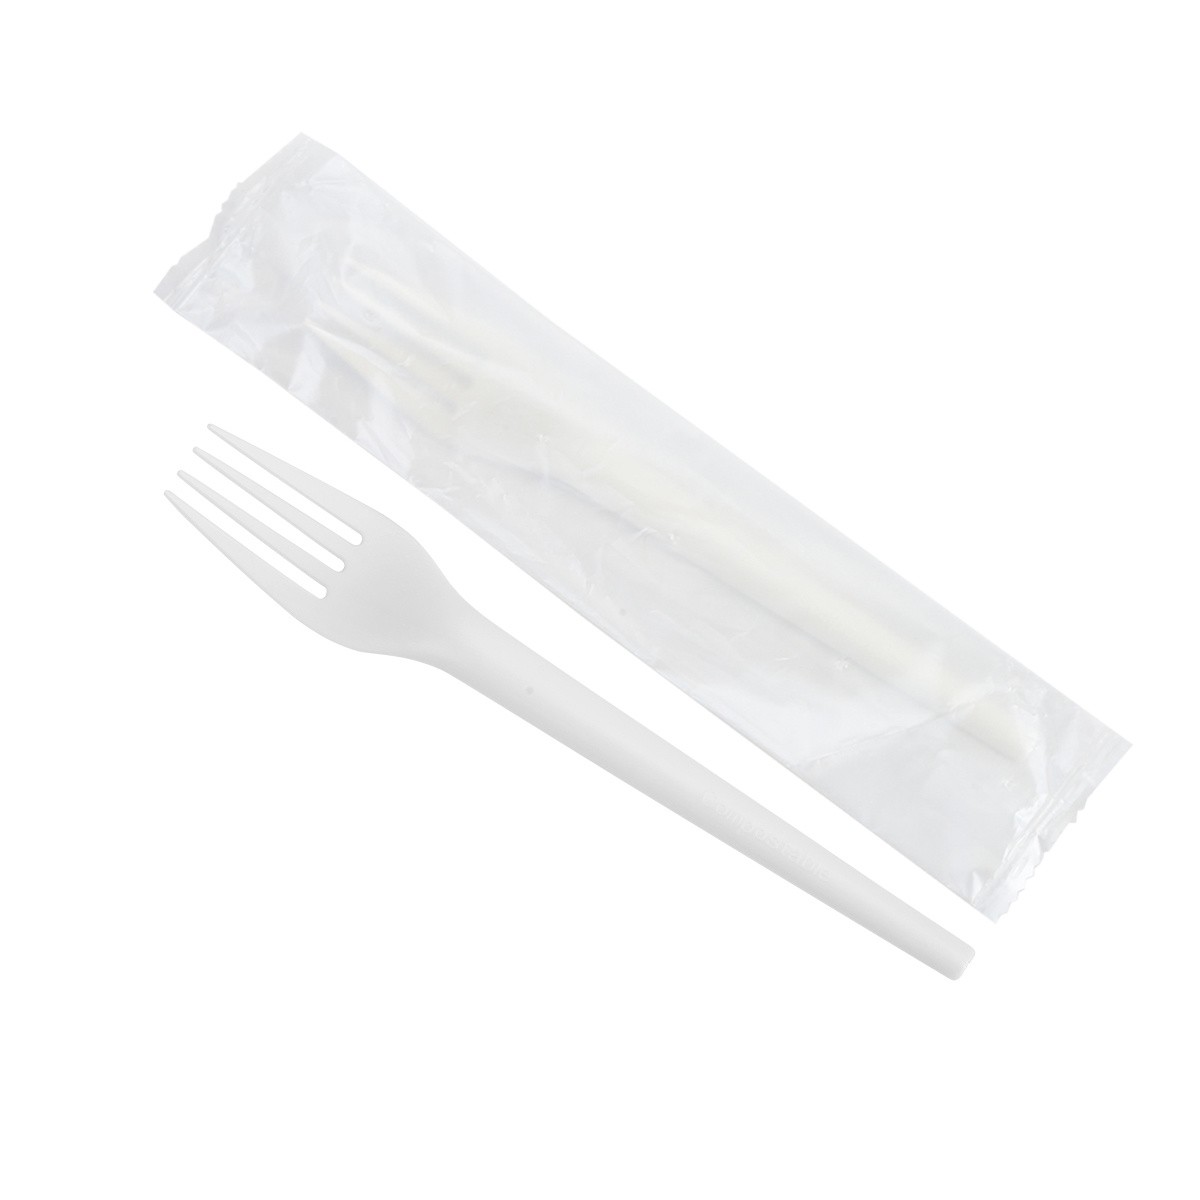 Quanhua Biodegradable Disposable Forks Are Environmentally Friendly Disposable Cutlery